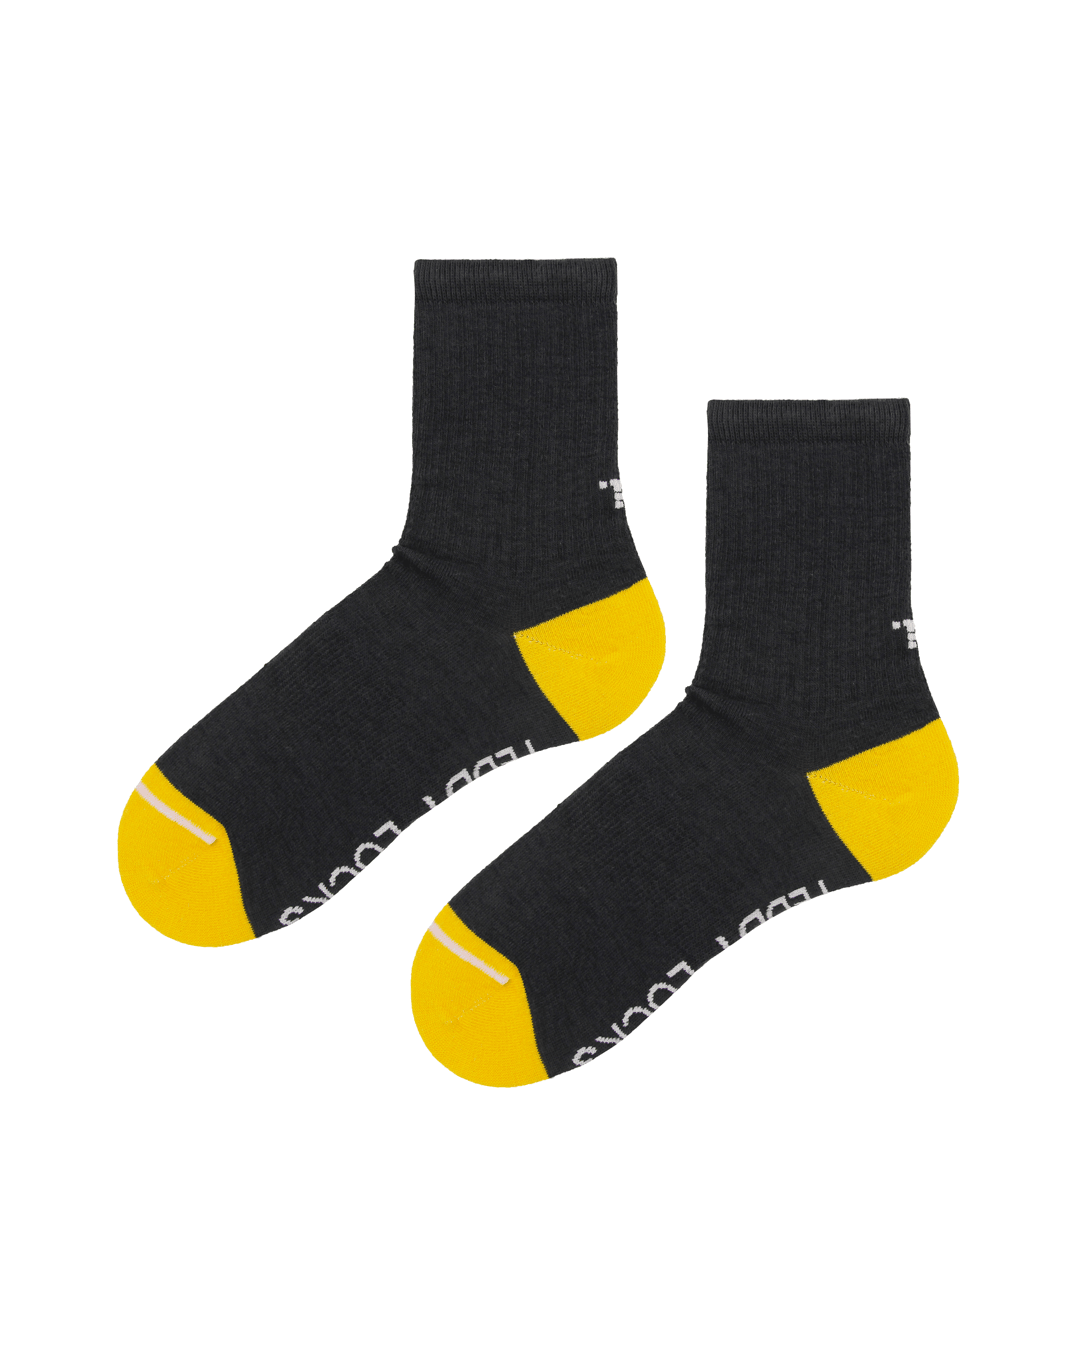 Ecofriendly charcoal ribbed crew socks. Welly boot socks made from recycled plastic bottles.